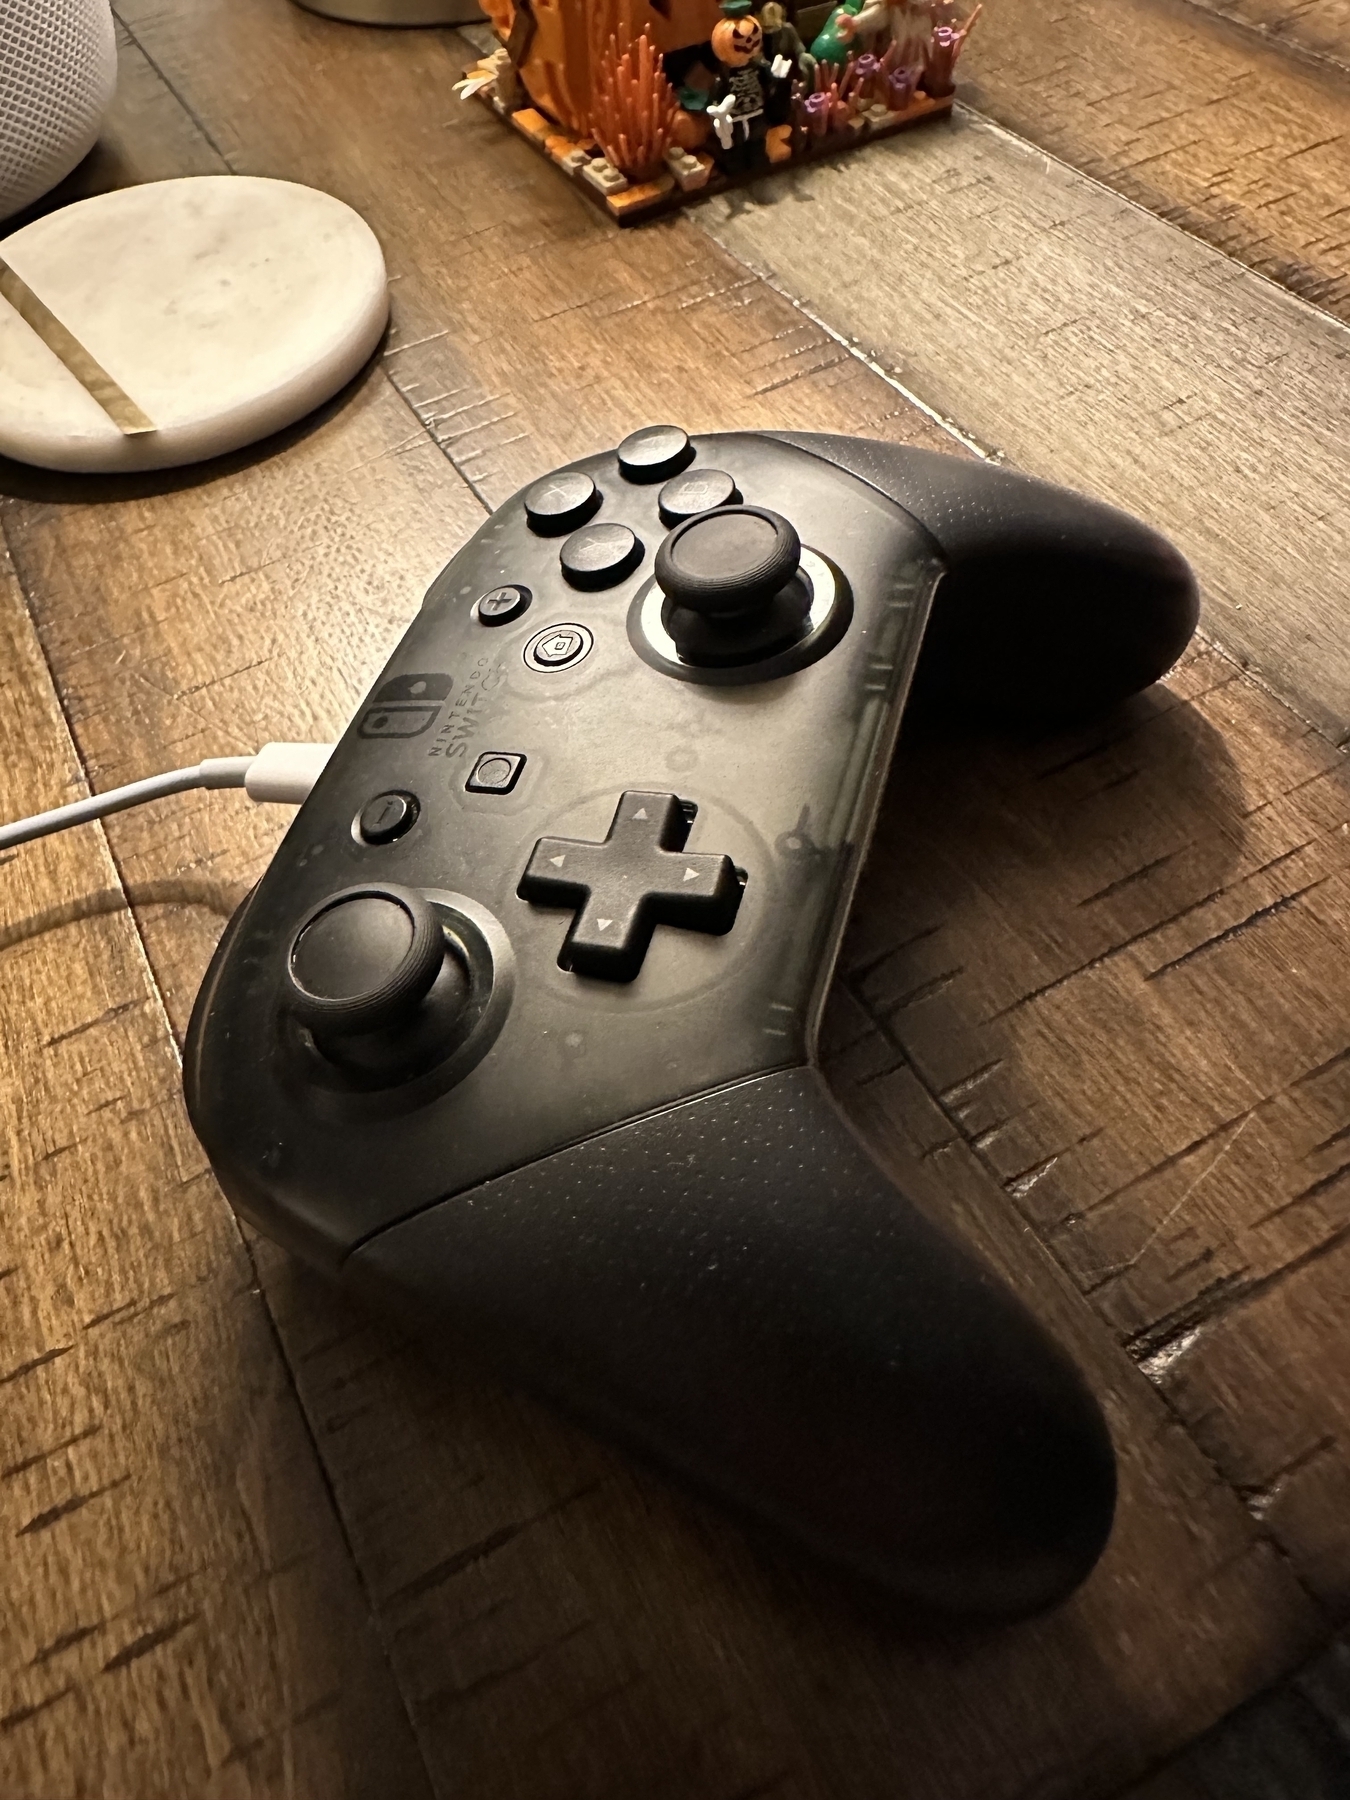 Black switch pro controller in wood table